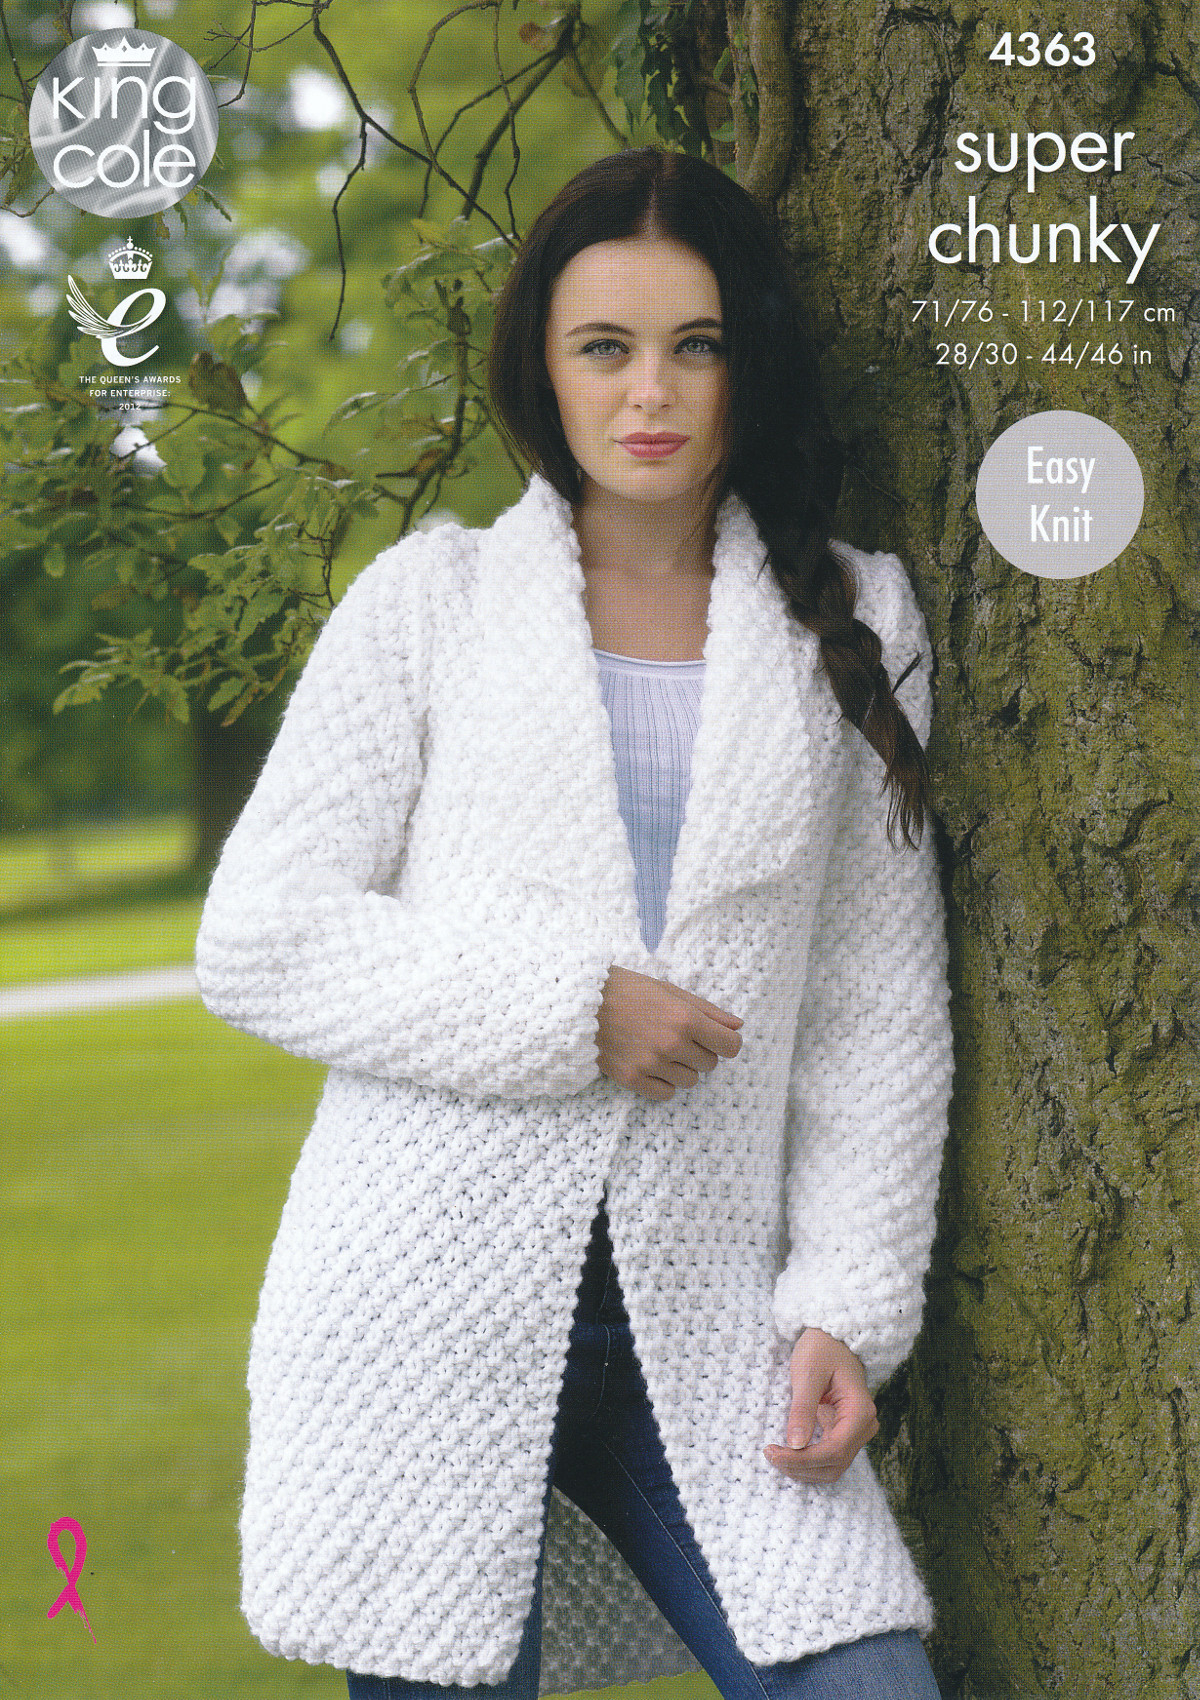 Sweater Jacket Knitting Pattern Details About Ladies Super Chunky Knitting Pattern King Cole Easy Knit Sweater Jacket 4363